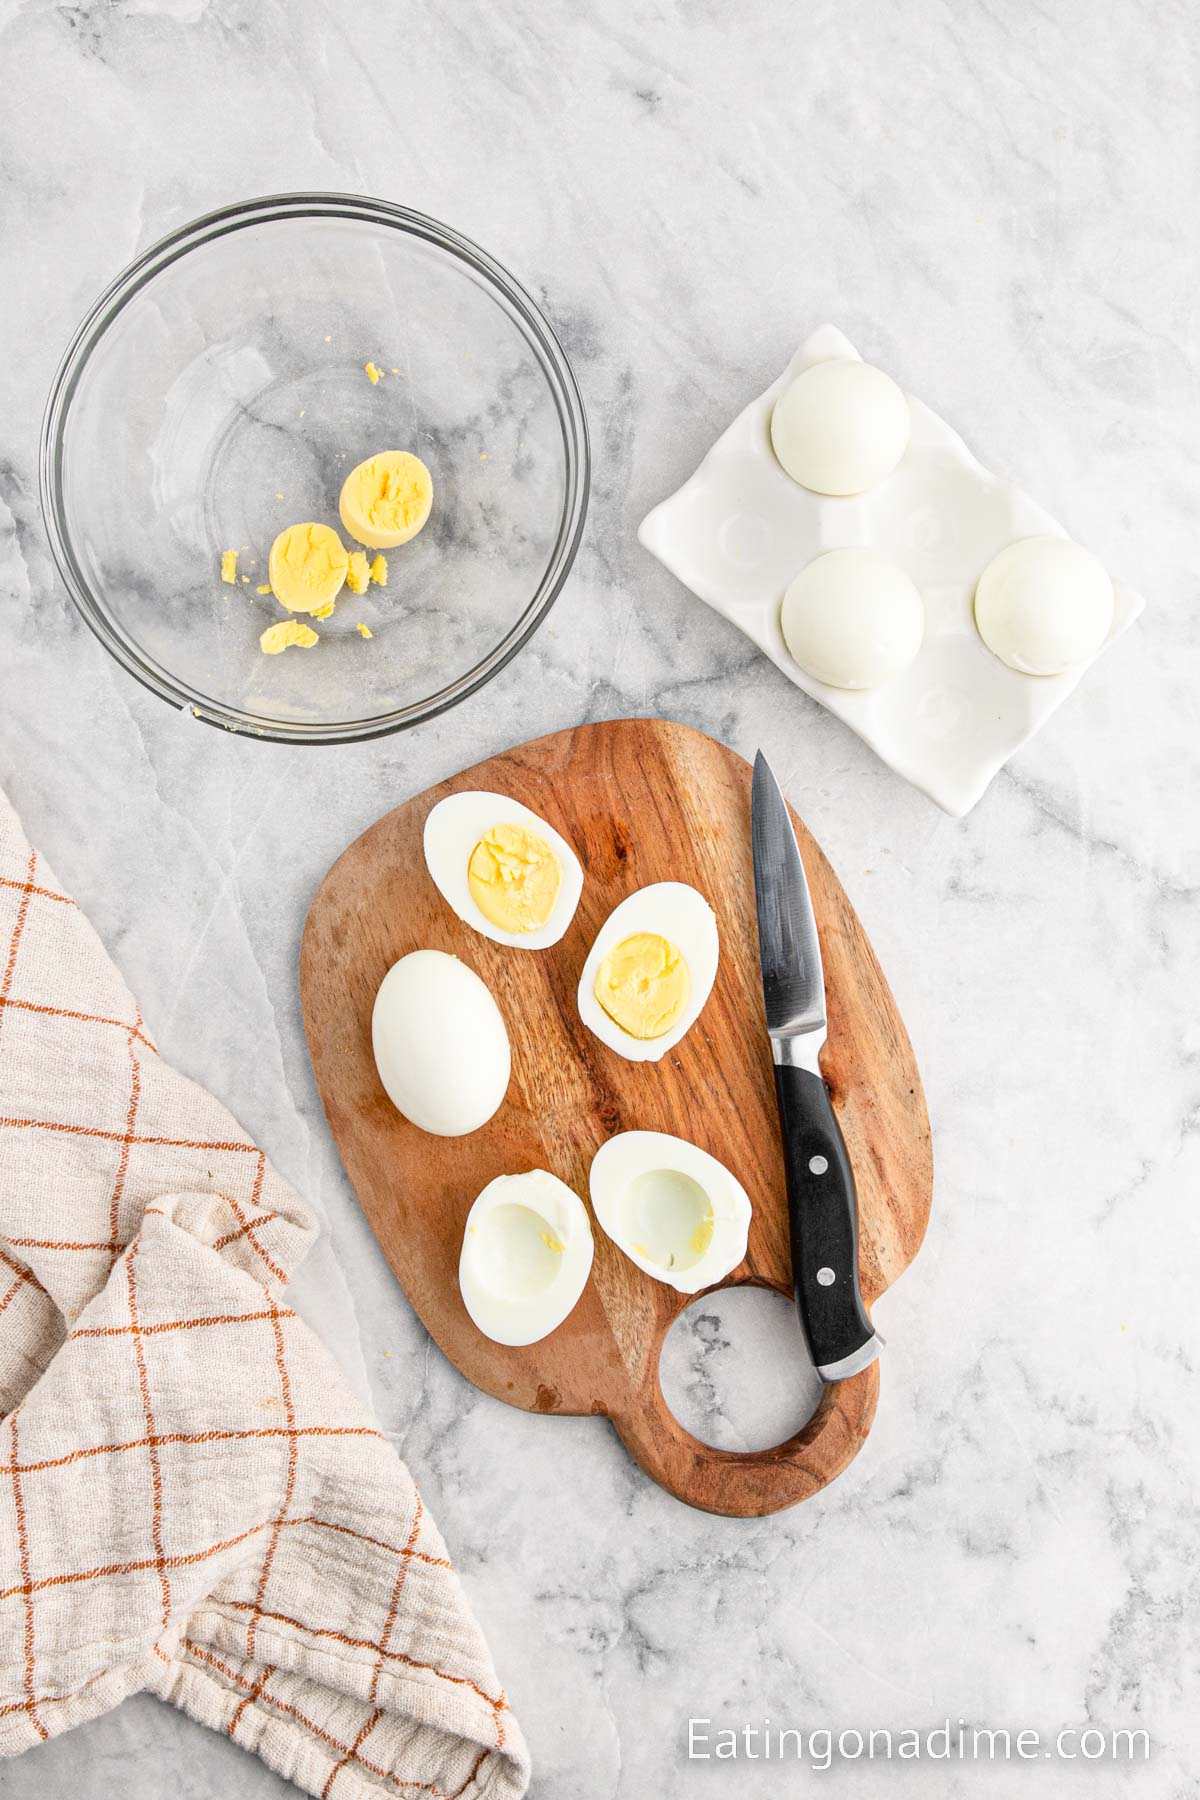 Slicing hard boiled eggs on a cutting board and placing yolk in the bowl